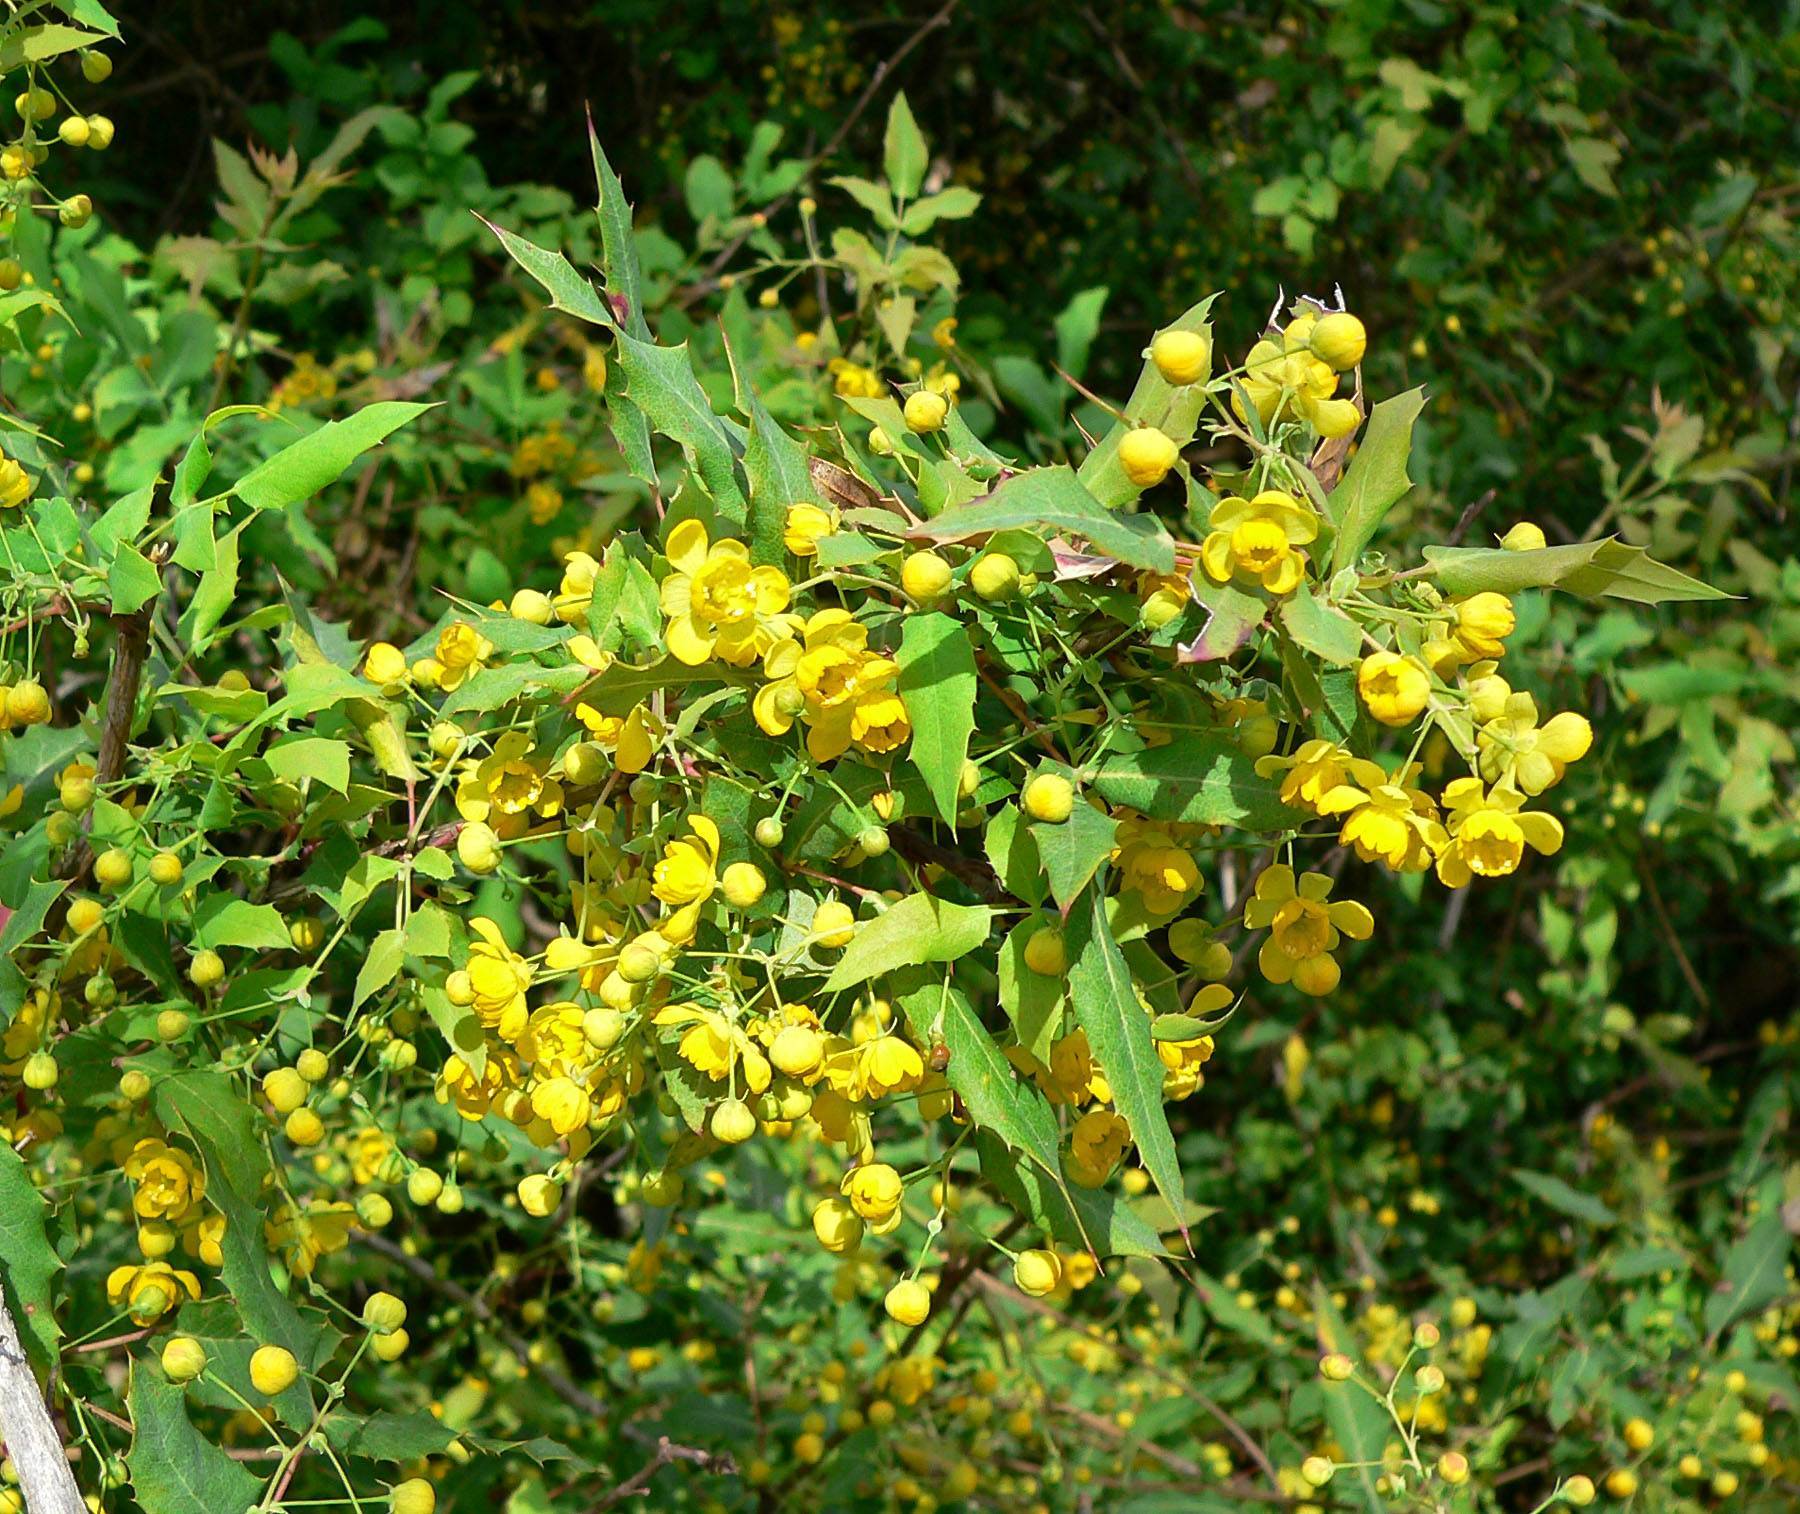 yellow flowers and buds with green leaves and beige stems